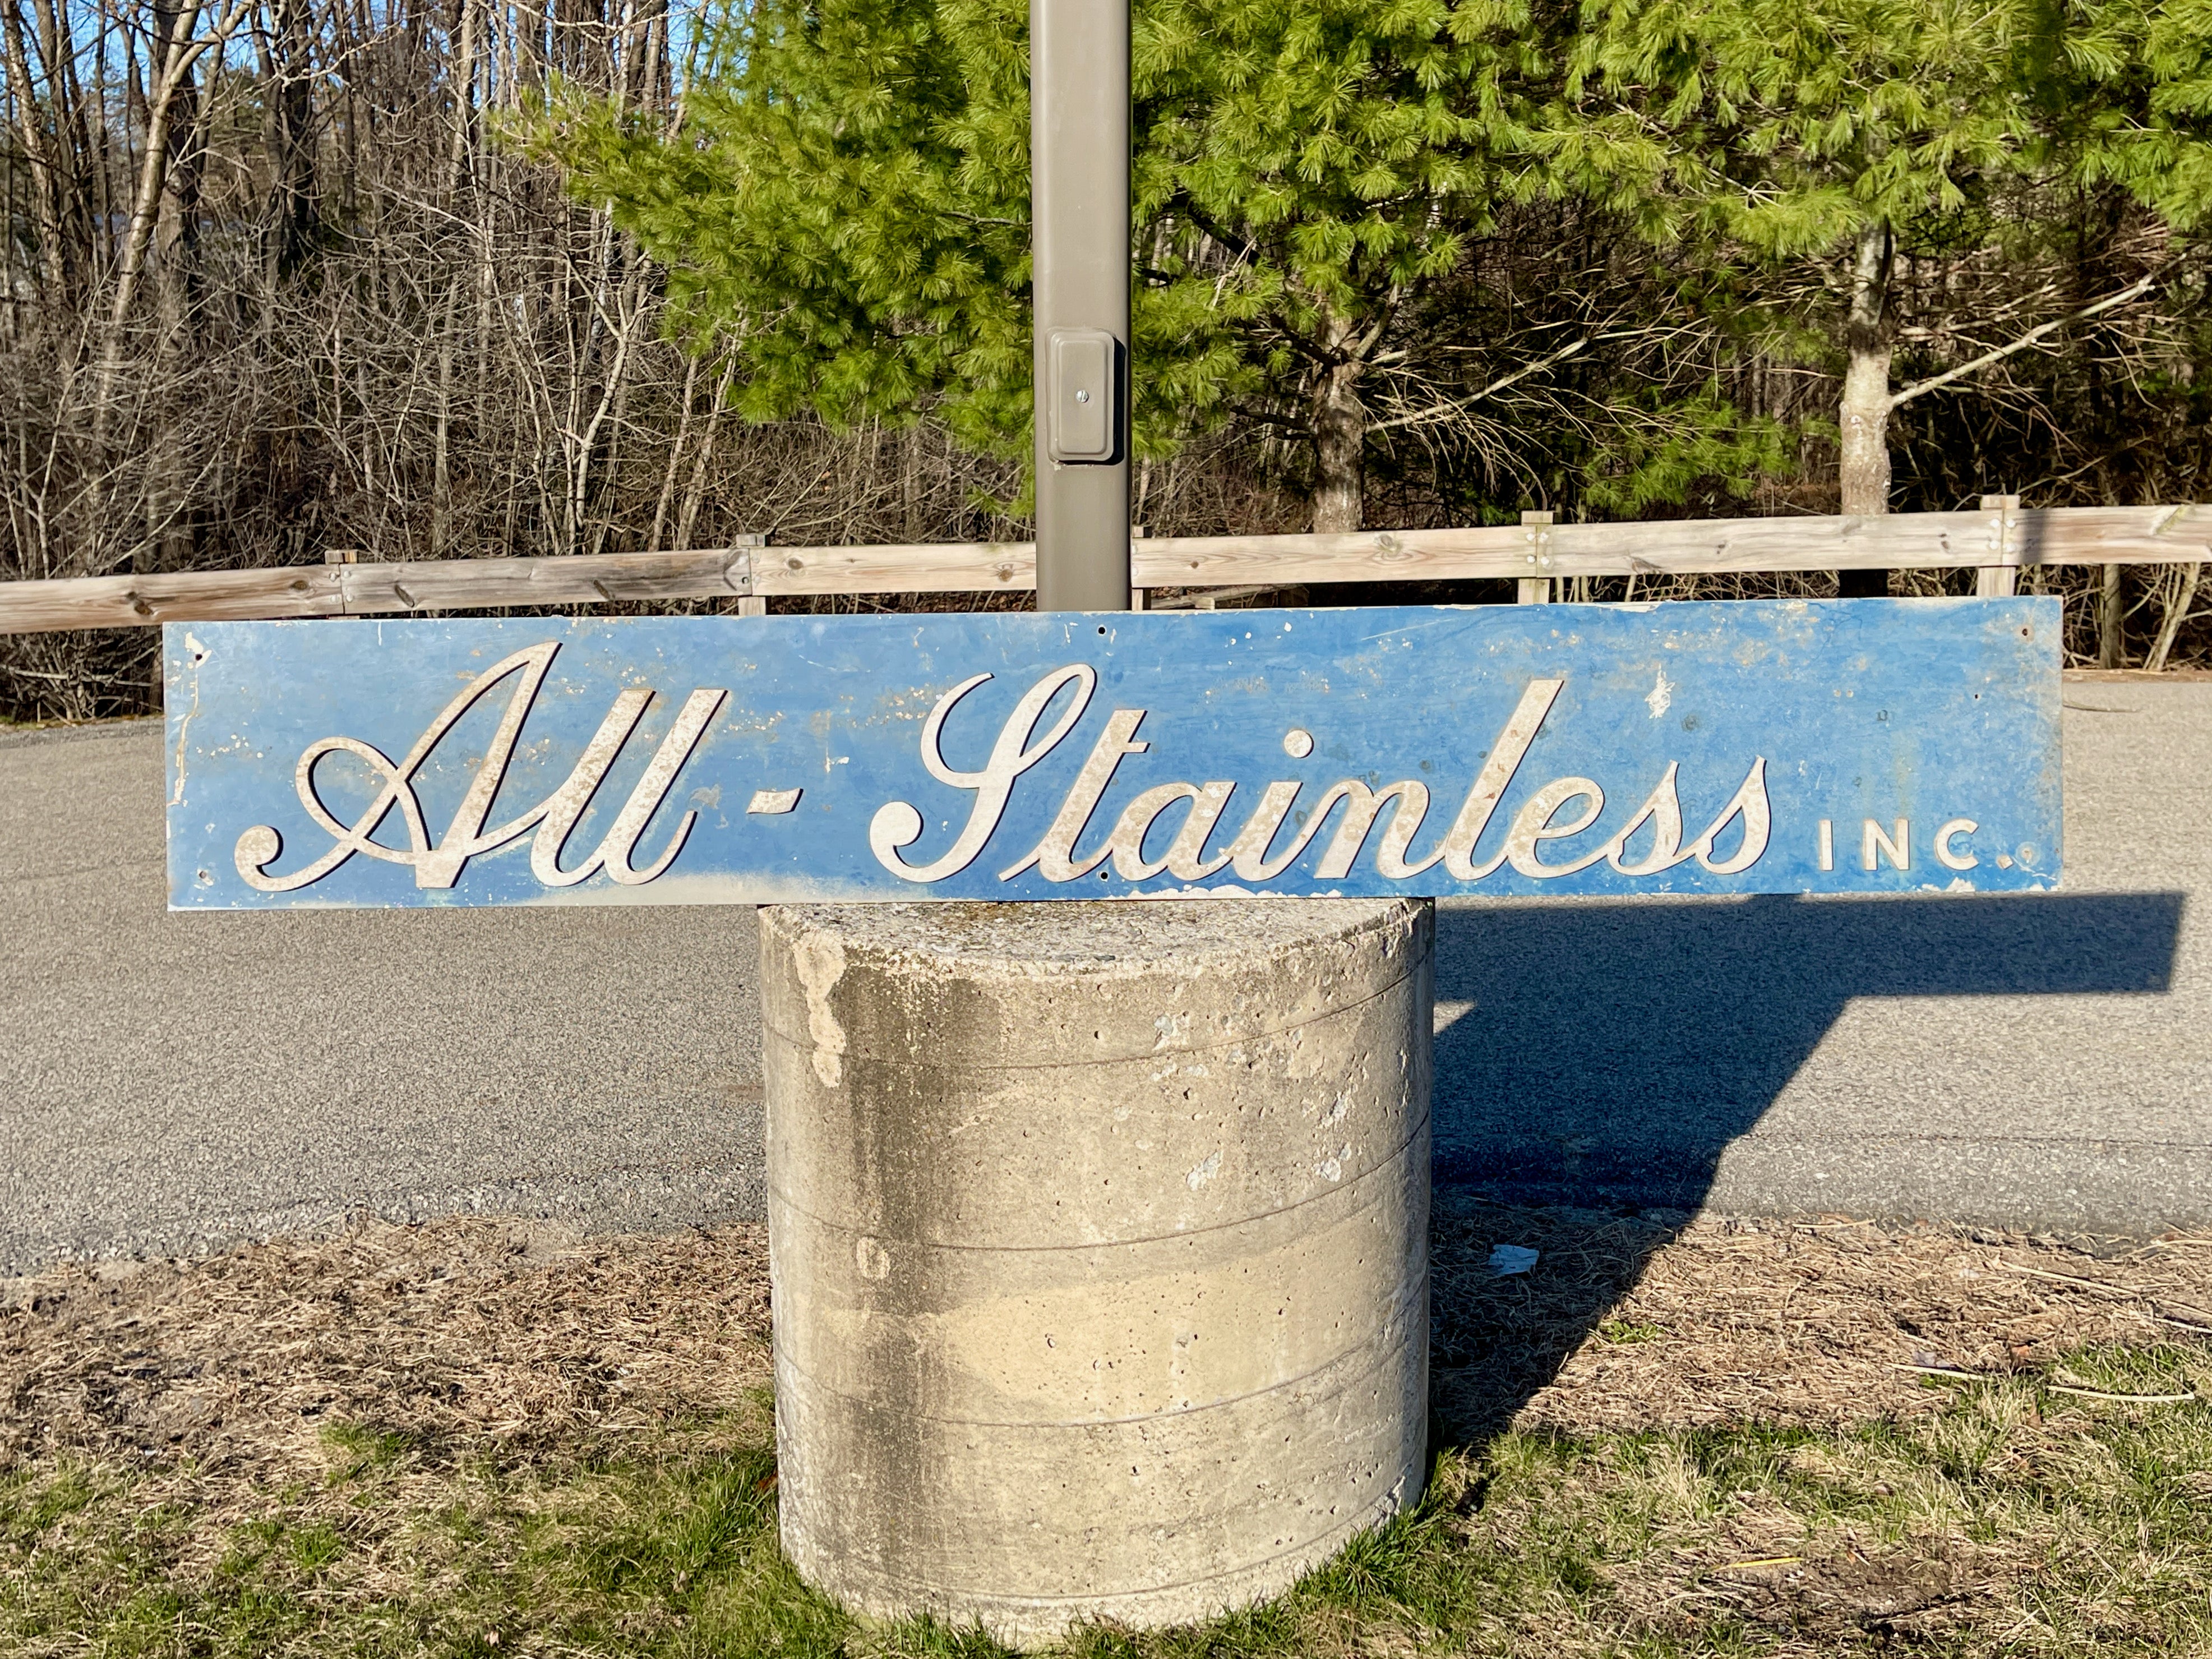 Vintage commercial business sign from early 1950's for All - Stainless, Inc.
78